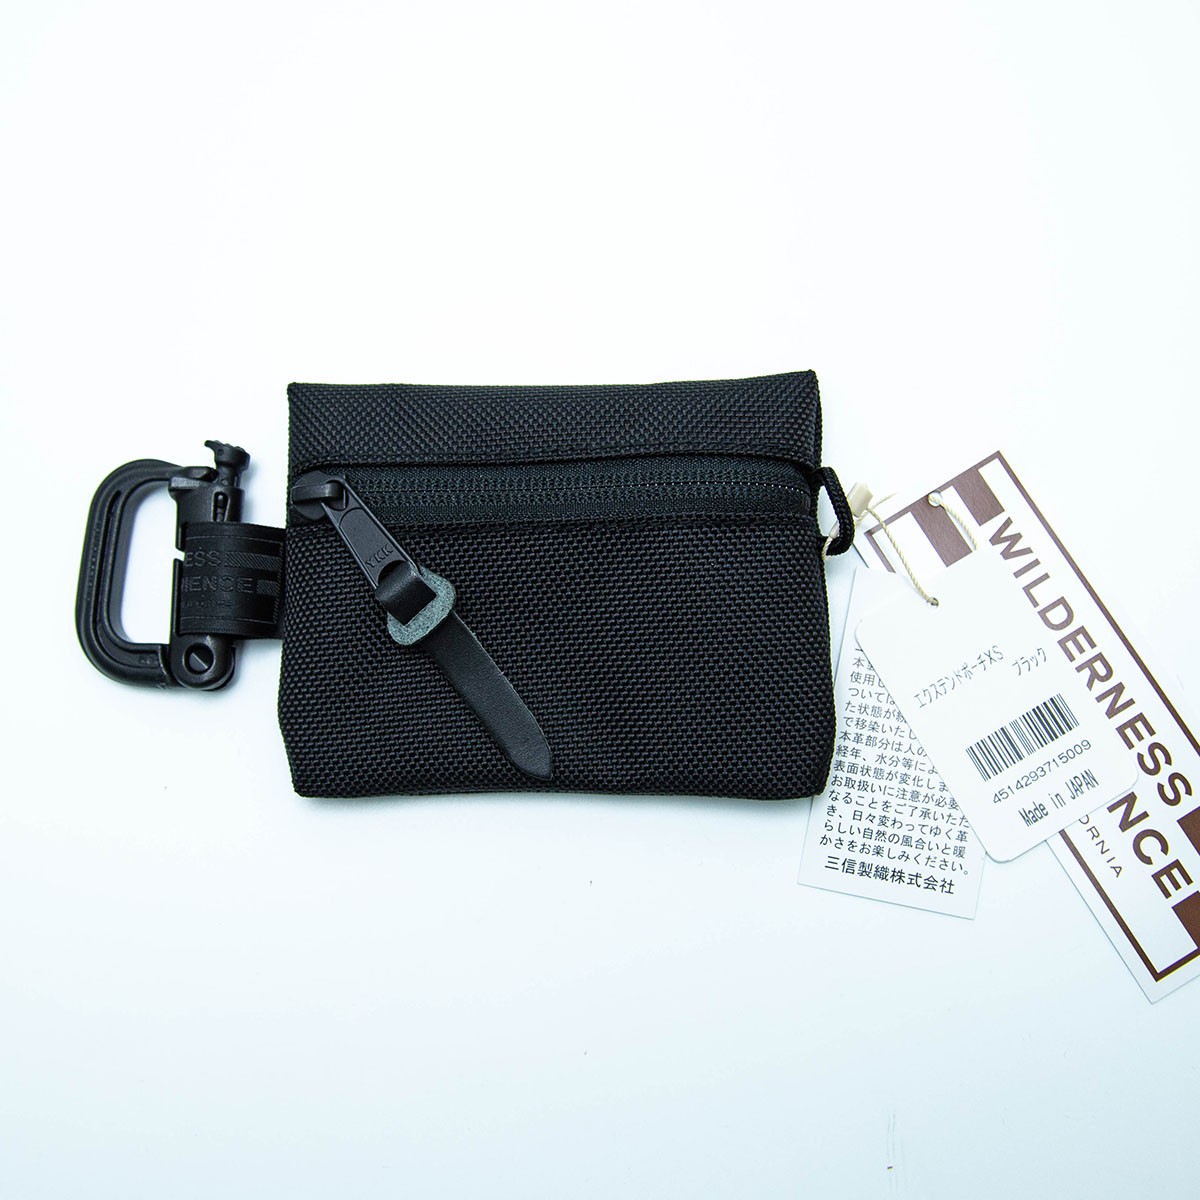 Wilderness Experience Extend Pouch XS Black 黑色 外掛包